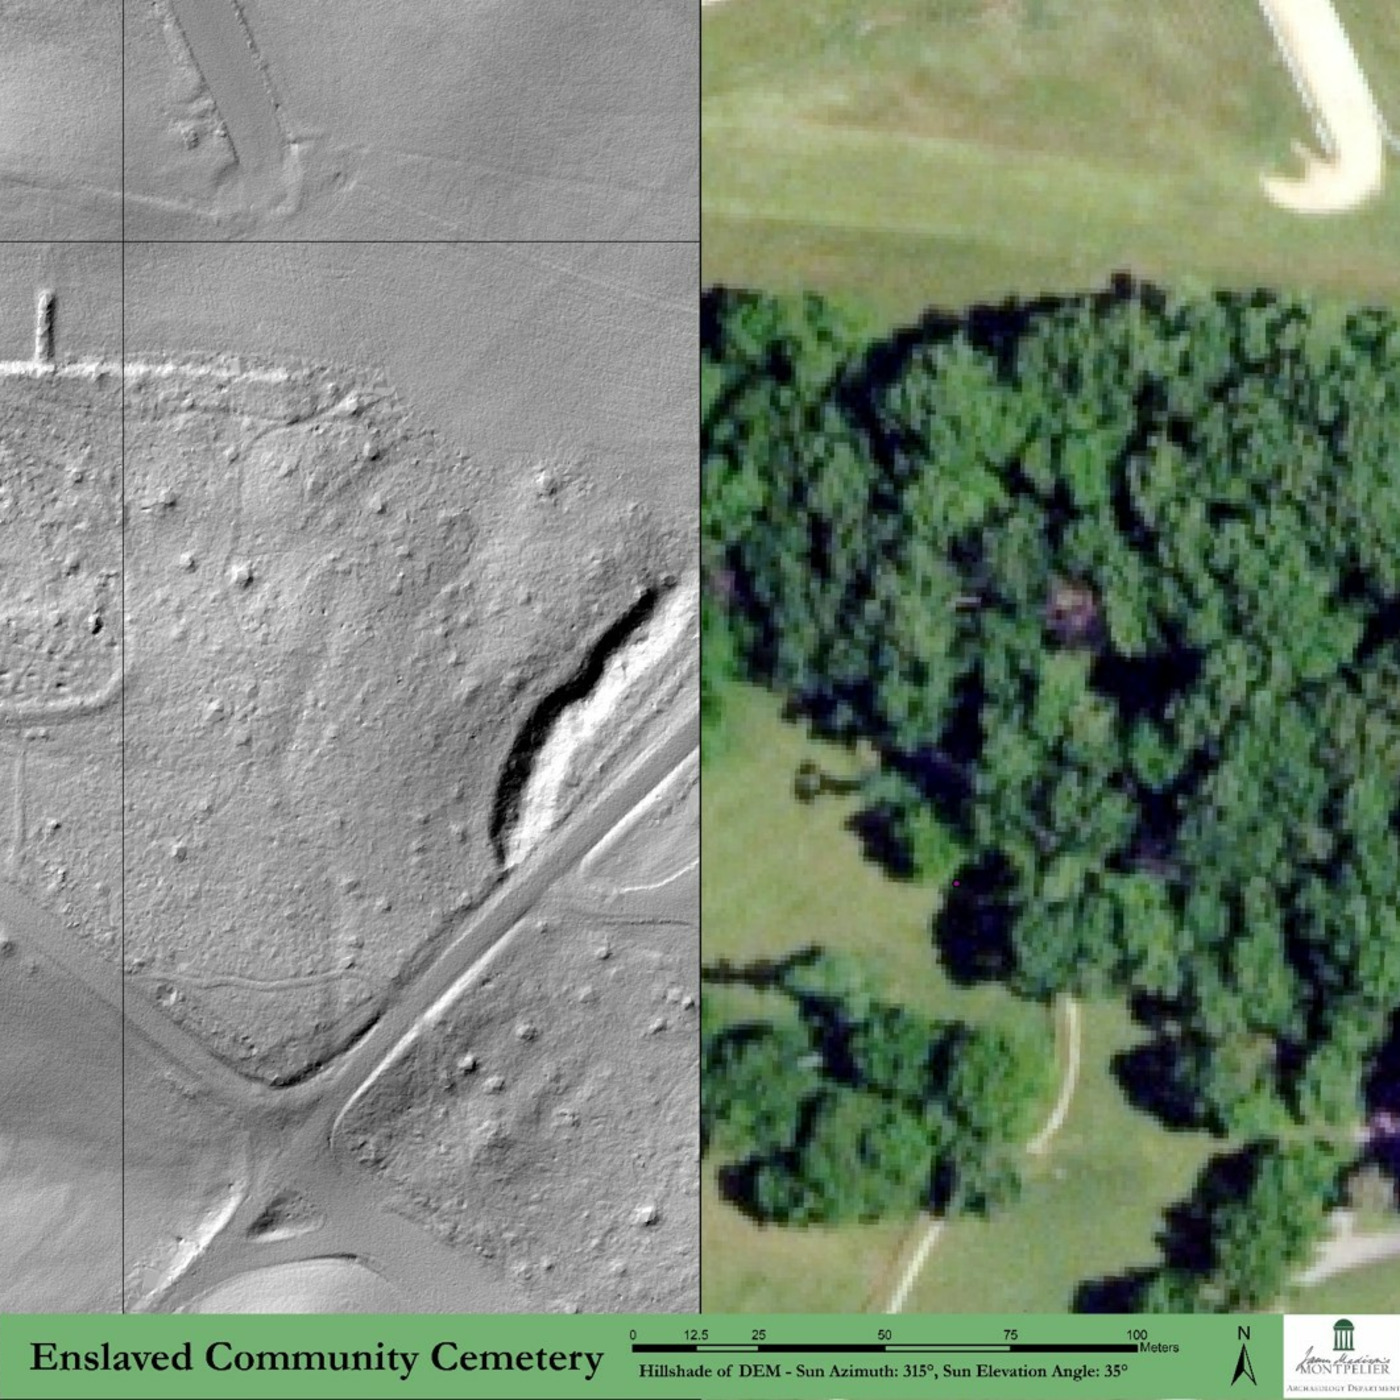 Montpelier, Constitutional History, and . . . LIDAR!